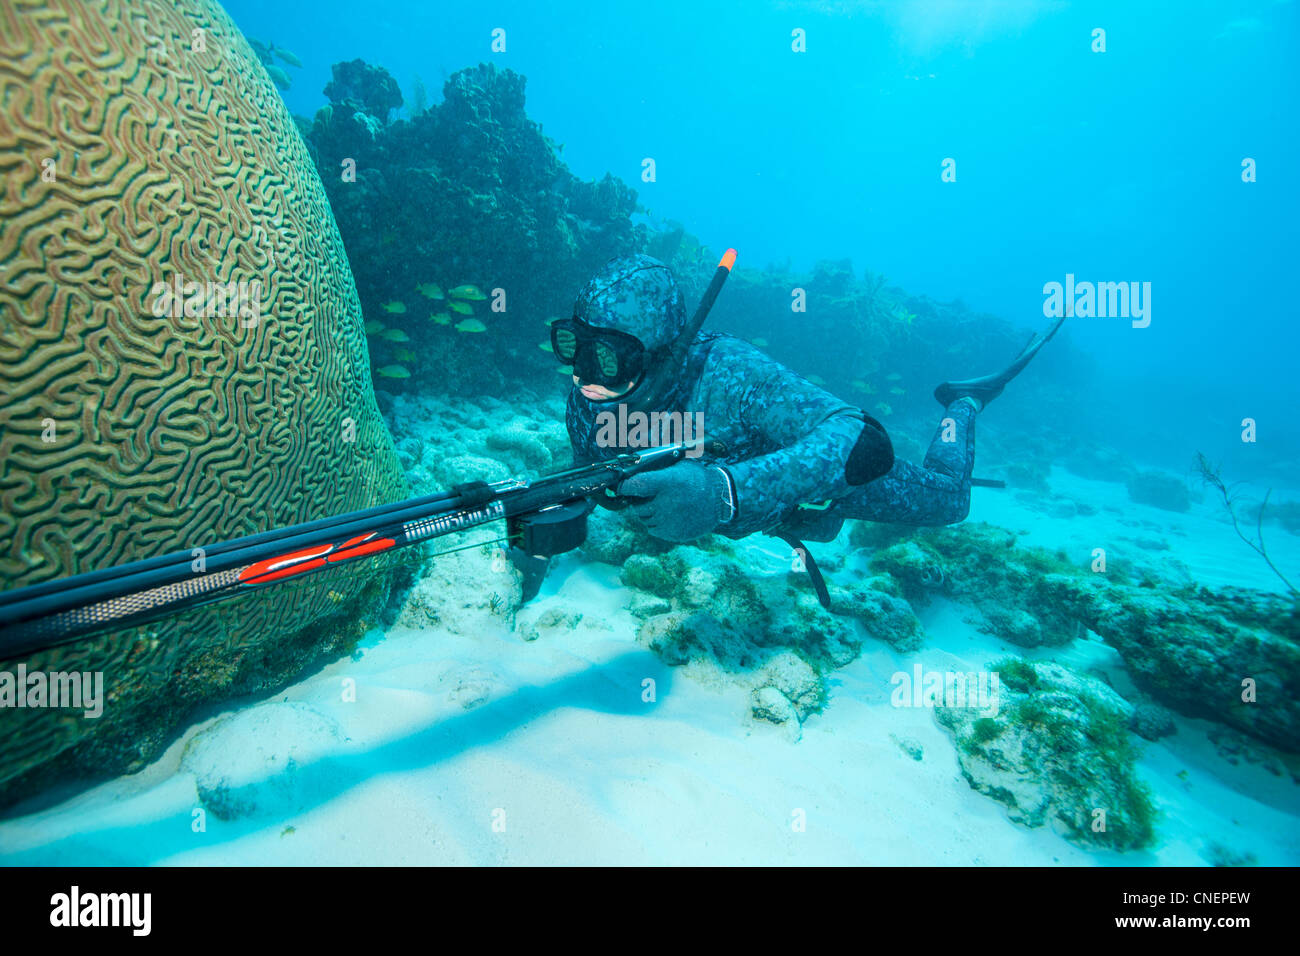 Spear fisherman with speargun on coral reef Stock Photo